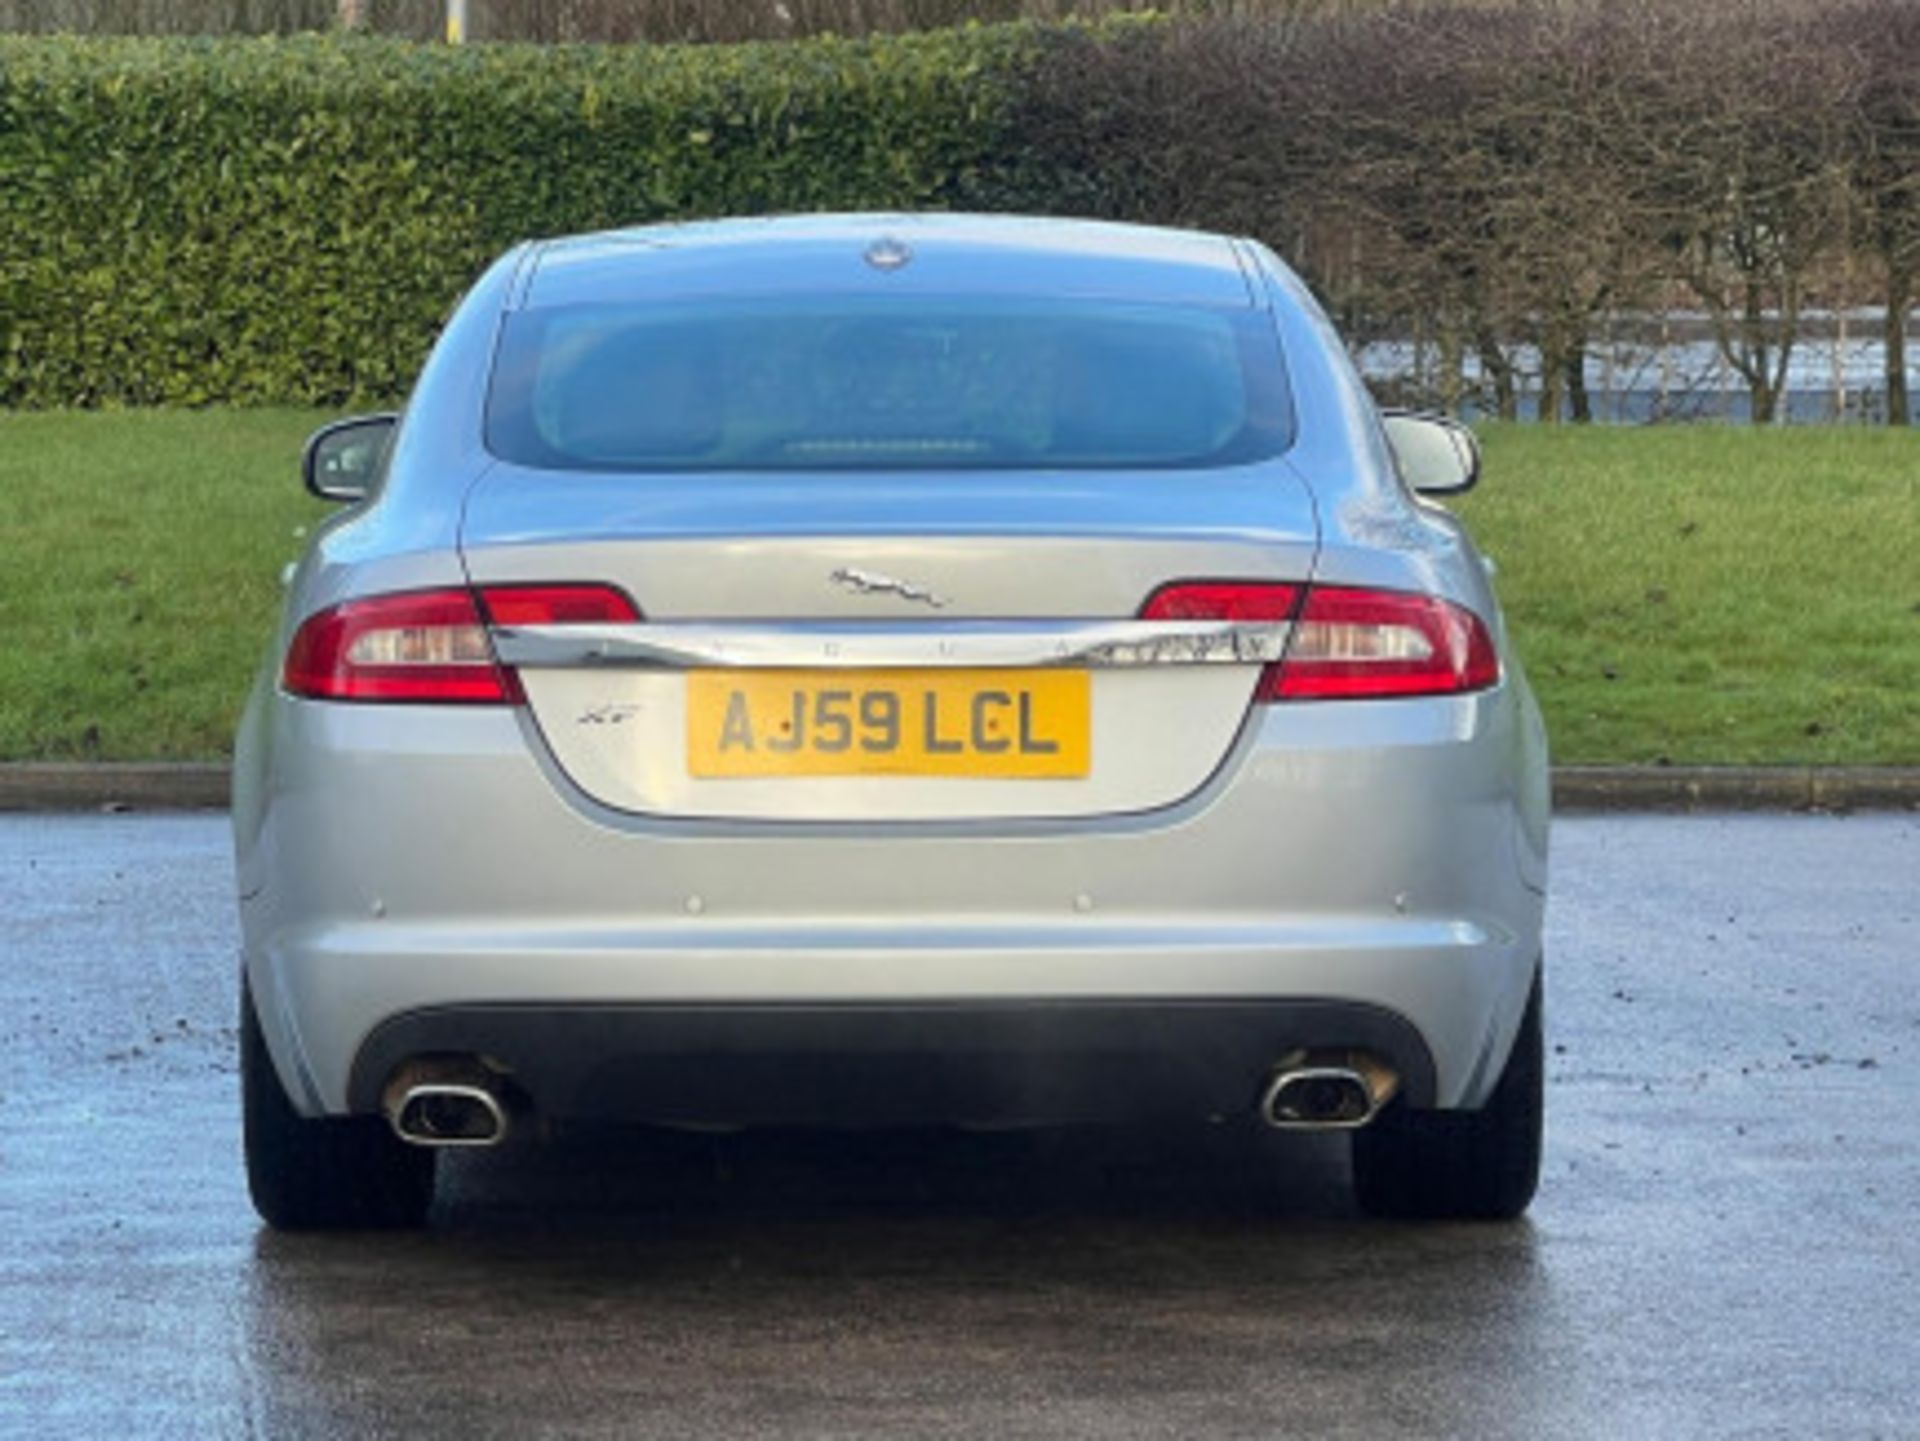 LUXURIOUS JAGUAR XF 3.0D V6 LUXURY 4DR AUTOMATIC SALOON >>--NO VAT ON HAMMER--<< - Image 56 of 118